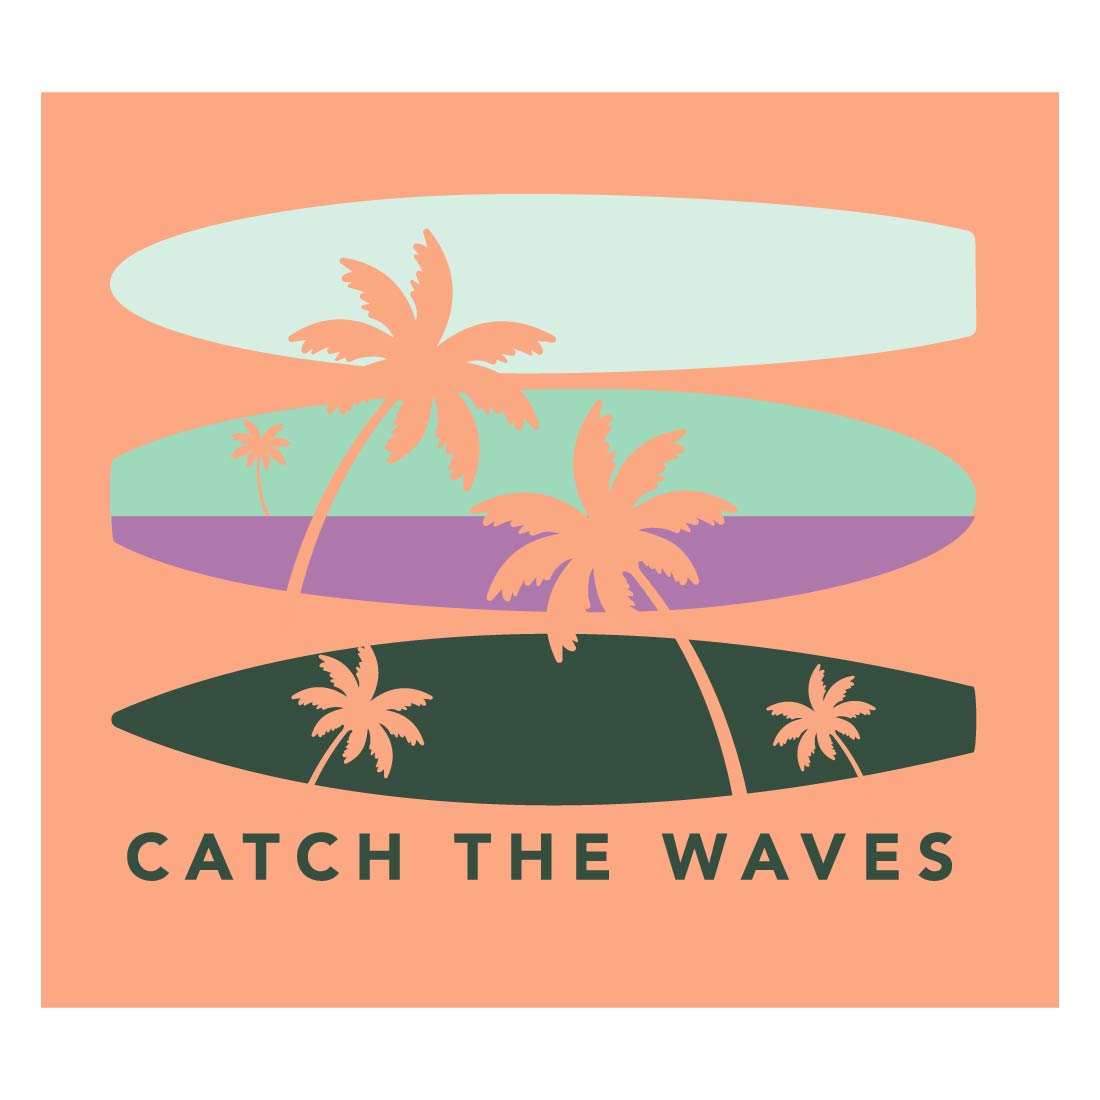 CATCH THE WAVES_T-SHIRT DESIGN REAL SIZE FOR 8 YEARS cover image.